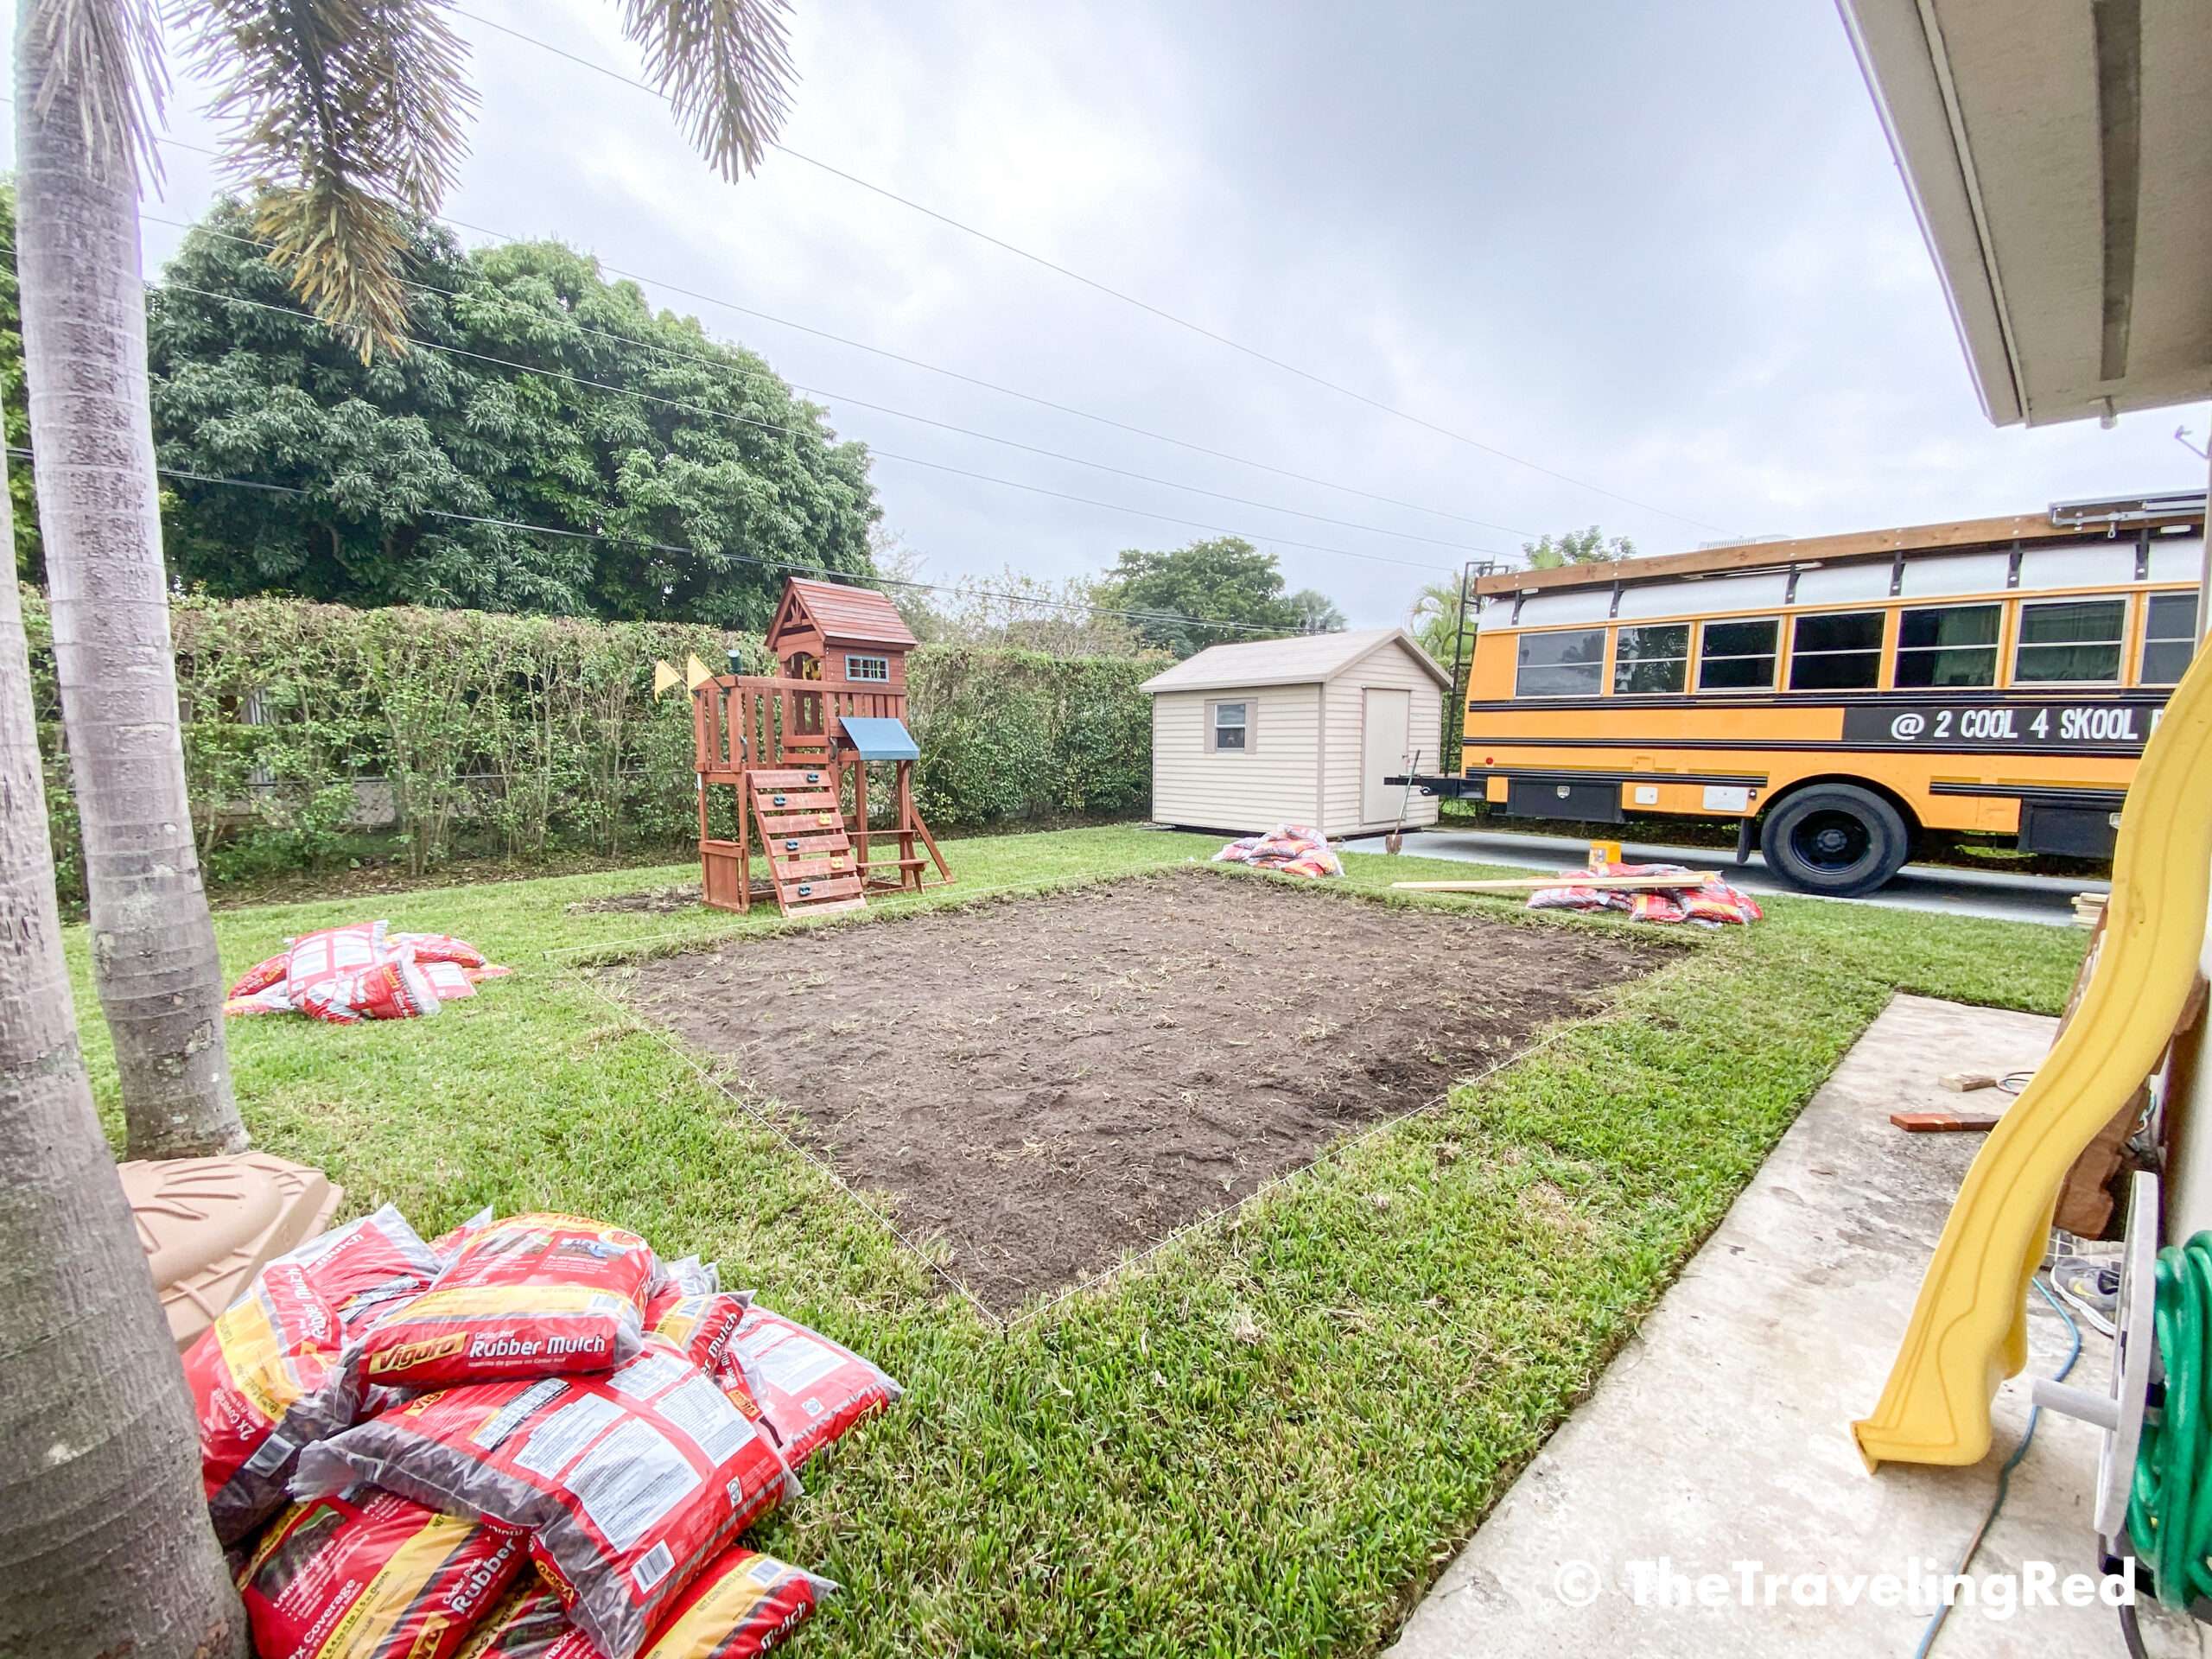 How to build a custom backyard playground with rubber mulch. Step 2 is to remove all of the grass from the space you plan to use. This space will fit our swingset, playhouse, sandbox or any other outdoor toys you plan to include. Perfect little outdoor play space for your kids to enjoy playing outside.